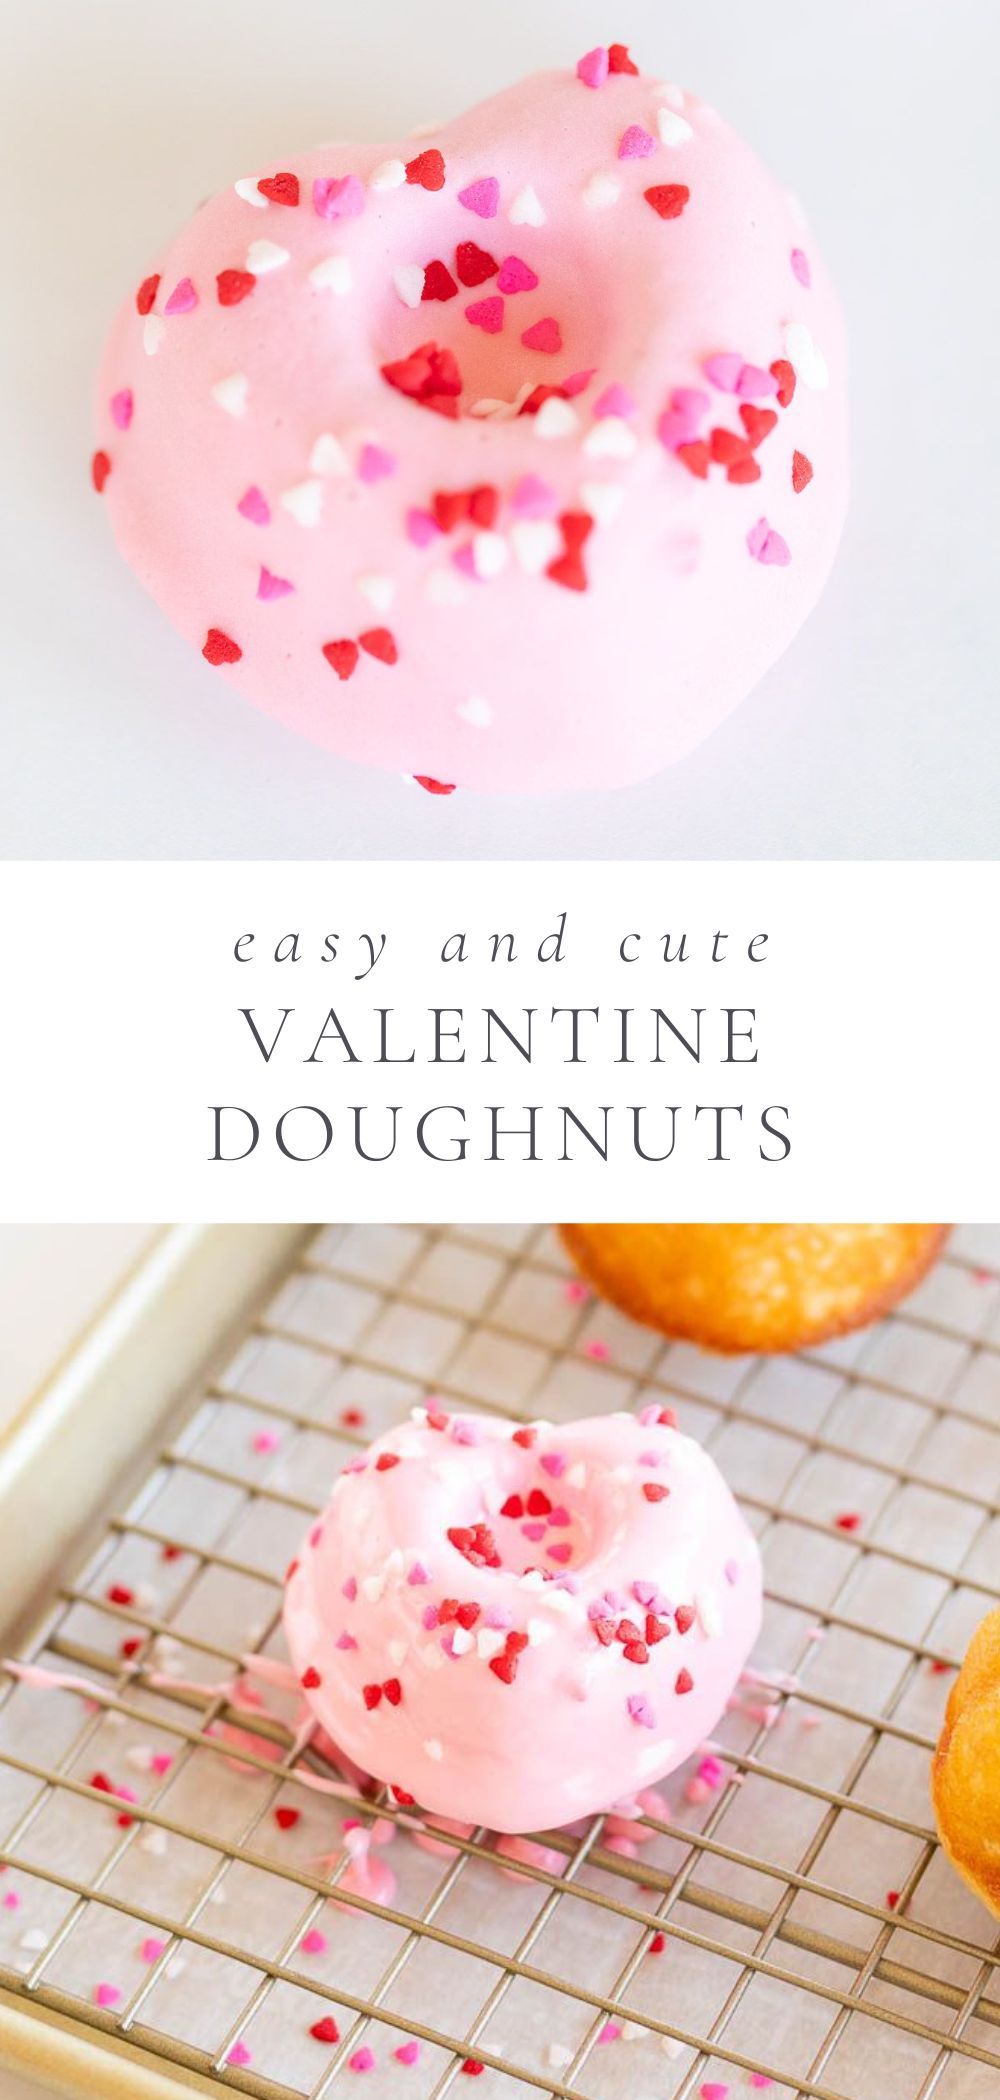 two pictures of heart shaped doughnuts with pink icing